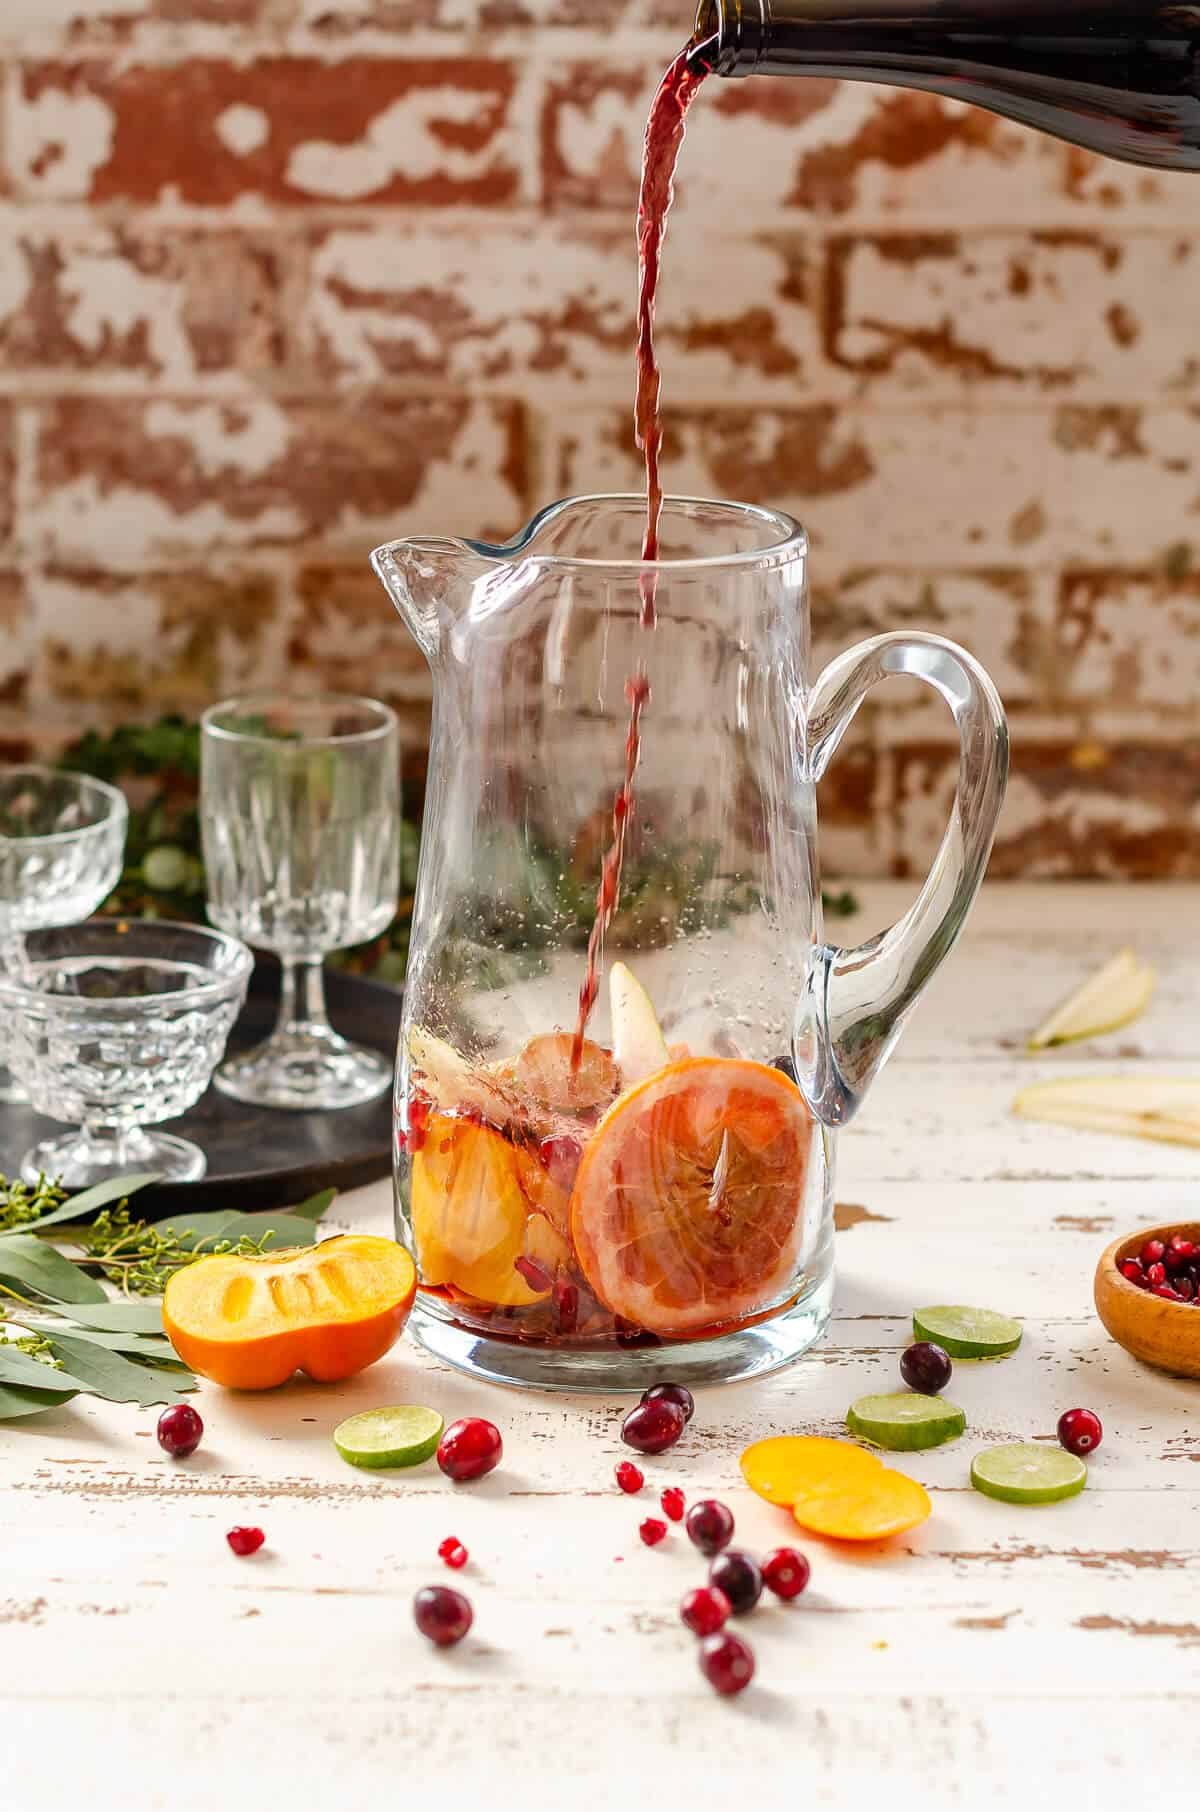 clear glass pitcher with grapefruit, persimmon, pears, and cranberries in the bottom, with red non-alcoholic wine being poured in.